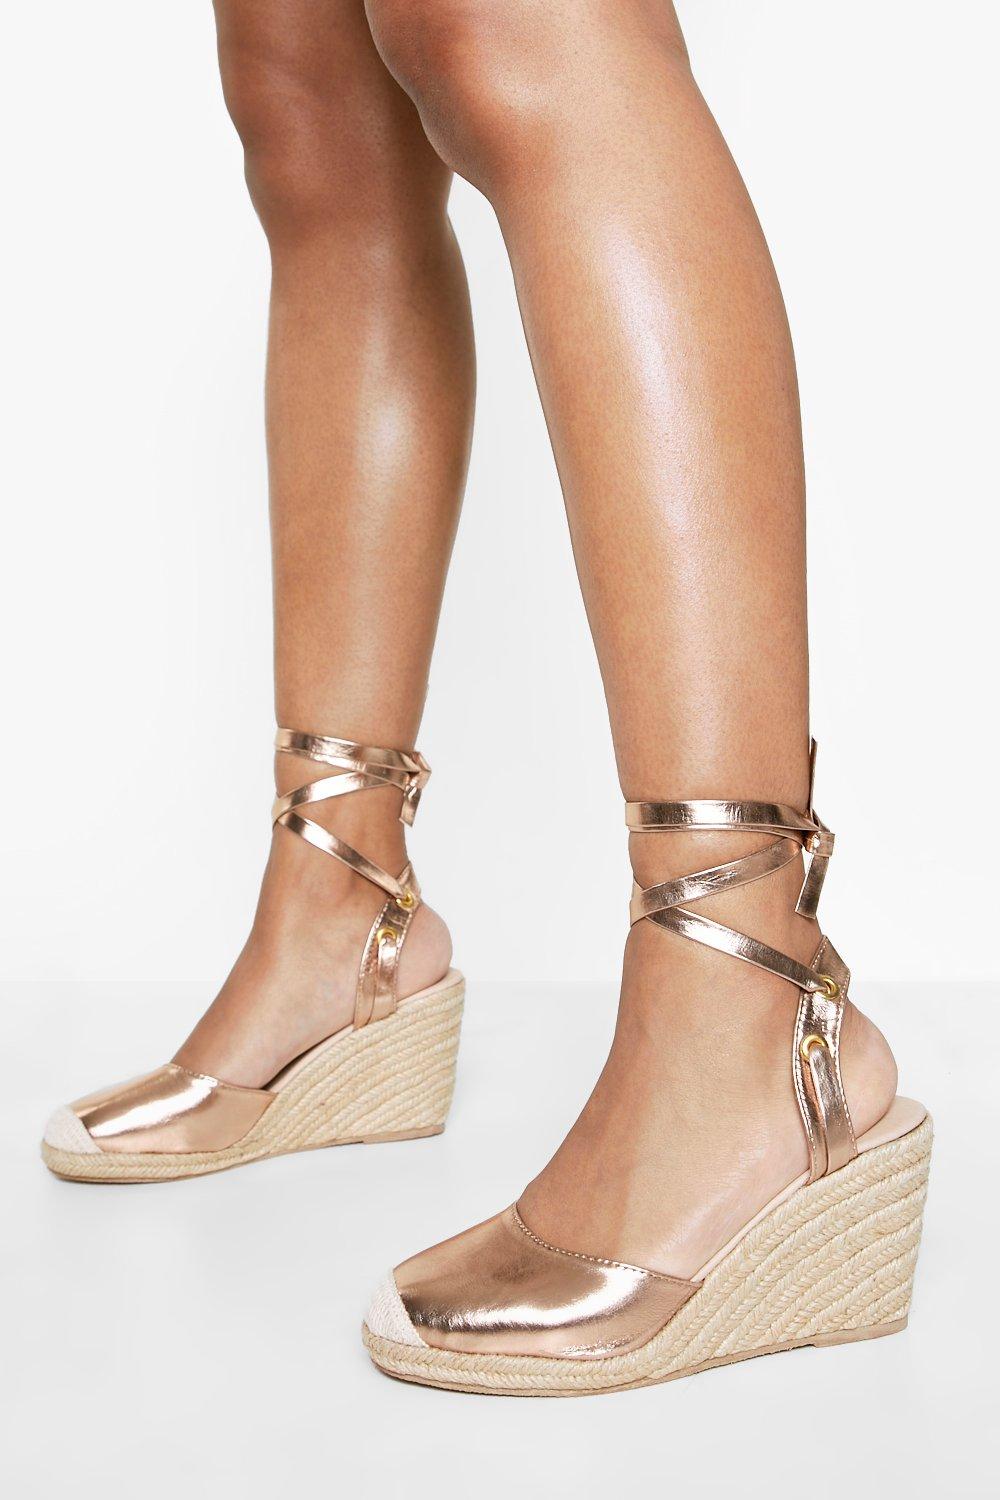 Rose Gold Faux Leather Wedges Design by Crimzon at Pernia's Pop Up Shop 2024